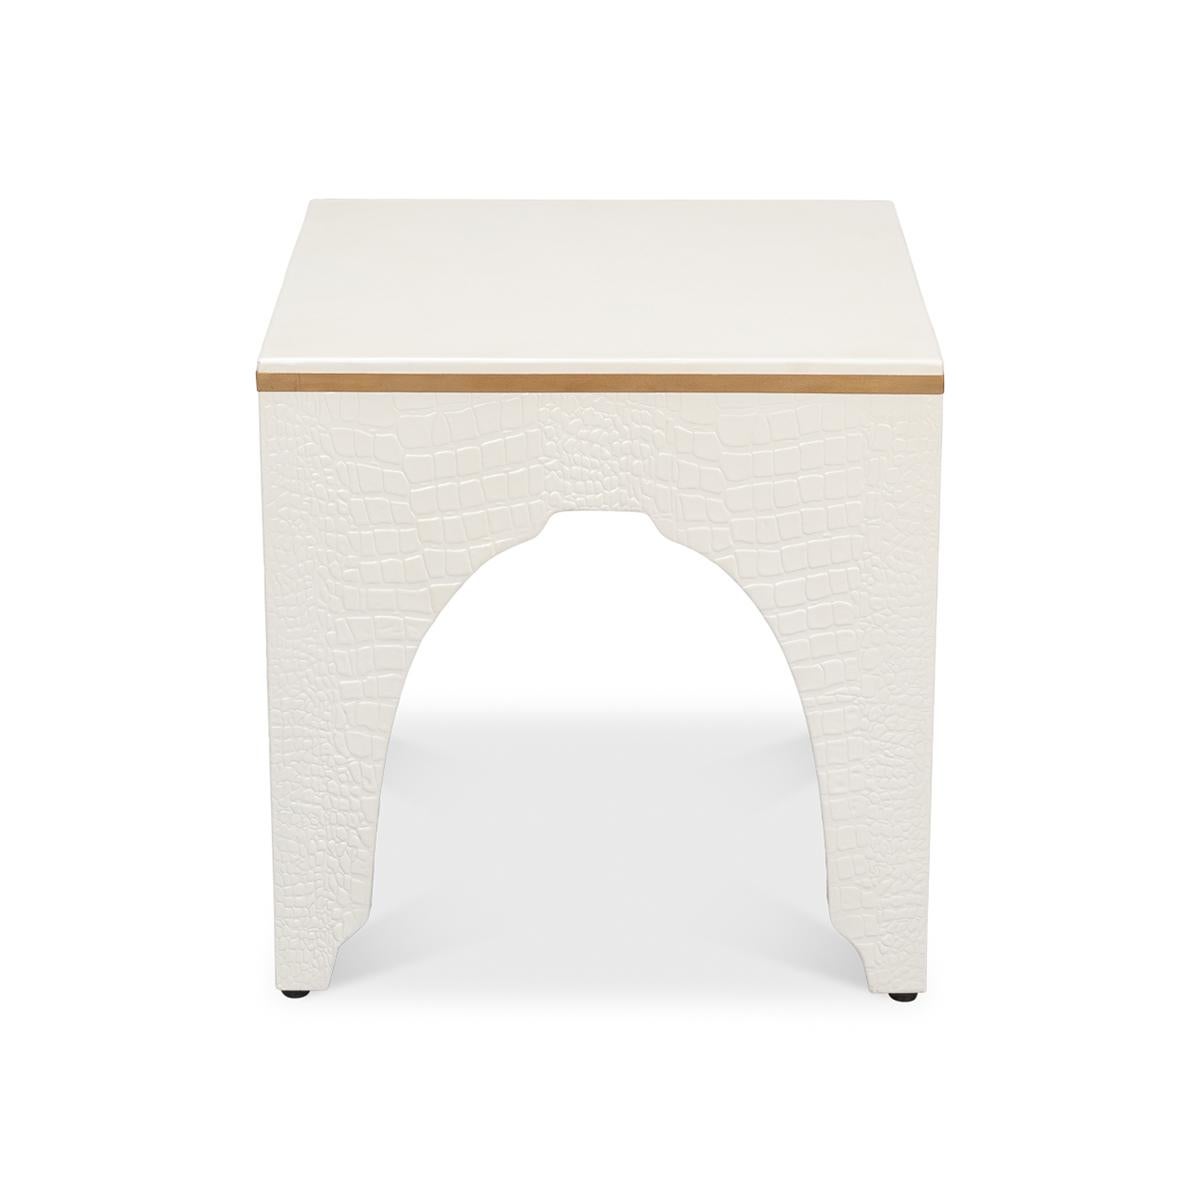 A testament to timeless elegance and luxury. Wrapped in sumptuous leather with a radiant white pearl croc finish, this ivory-hued stool exudes a refined charm that elevates any interior space.

Its sophisticated design, reflecting the grandeur of